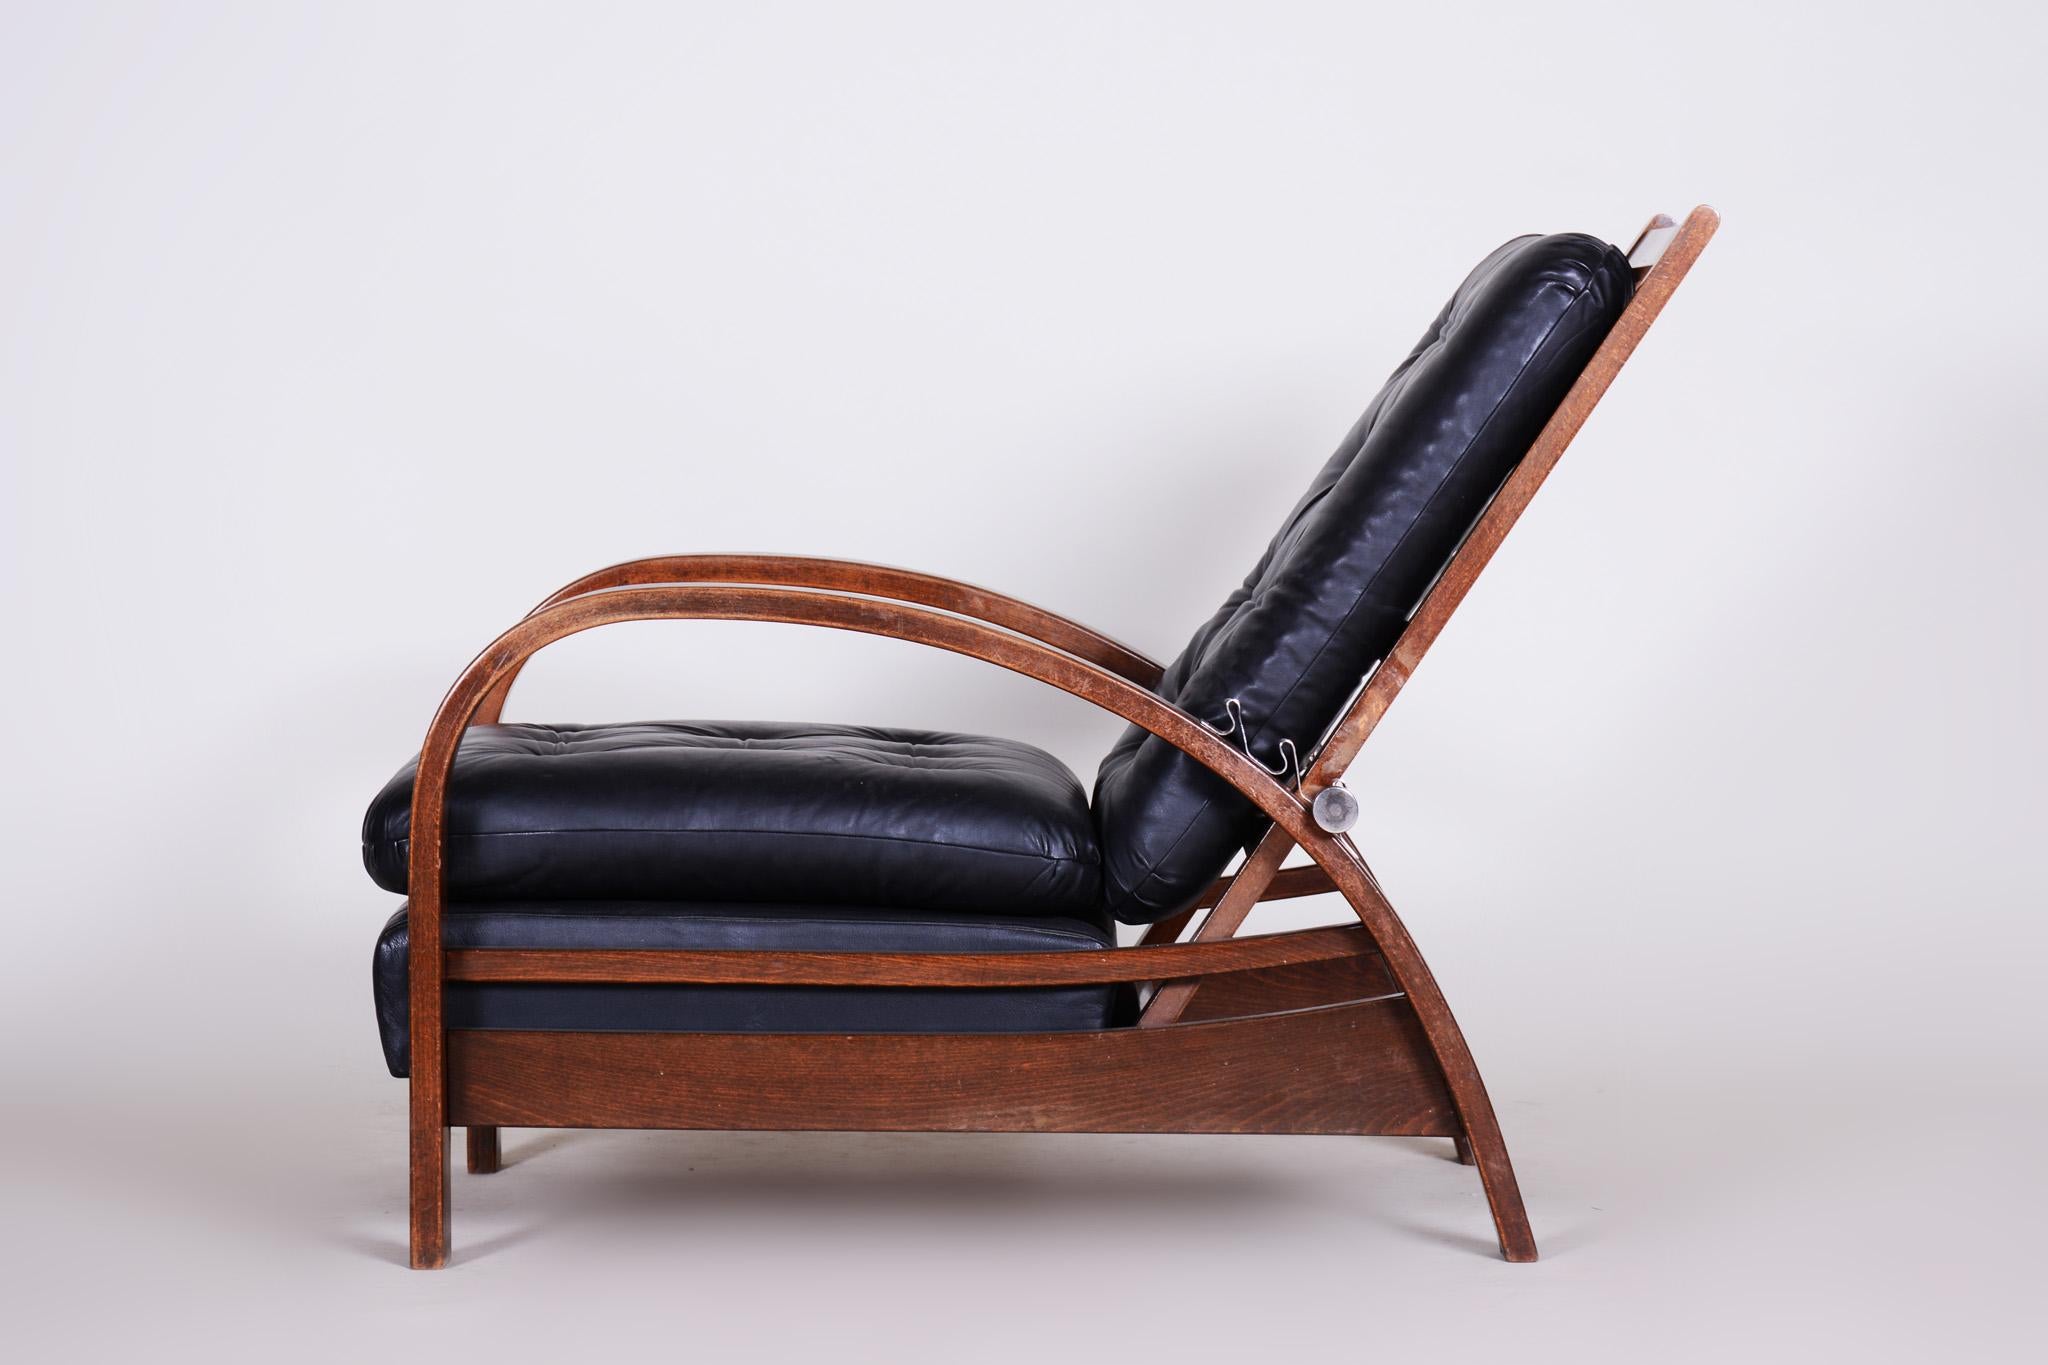 20th Century Beech Art Deco Positioning Armchair, 1930s, Original Well Preserved Condition